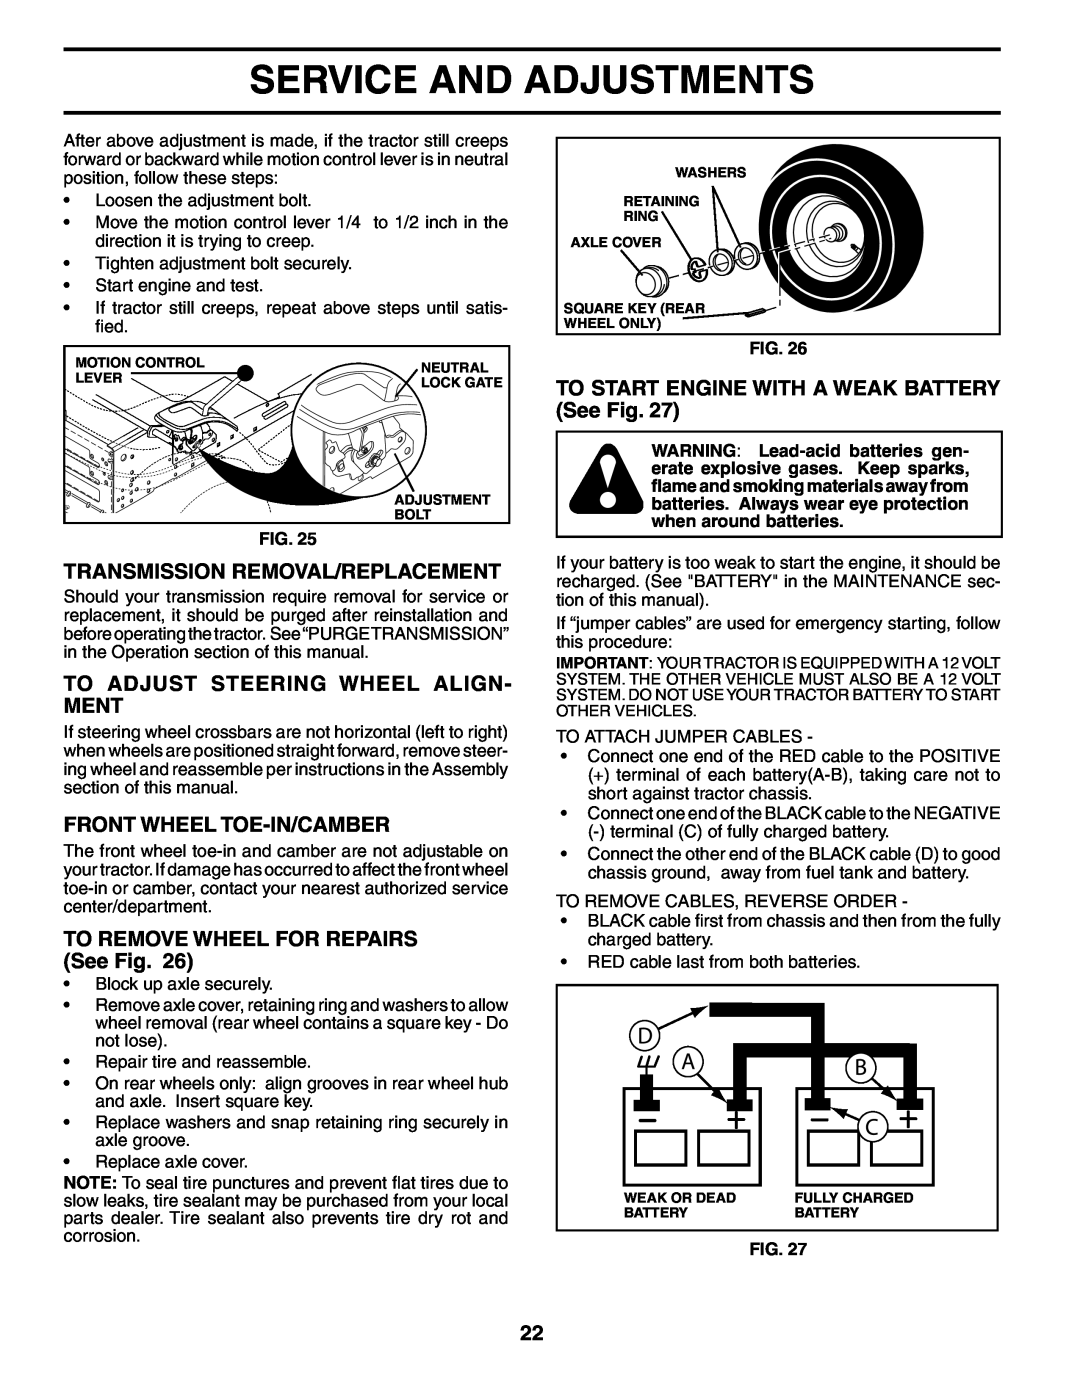 Poulan 194831 manual Transmission Removal/Replacement, To Adjust Steering Wheel Align- Ment, Front Wheel Toe-In/Camber 